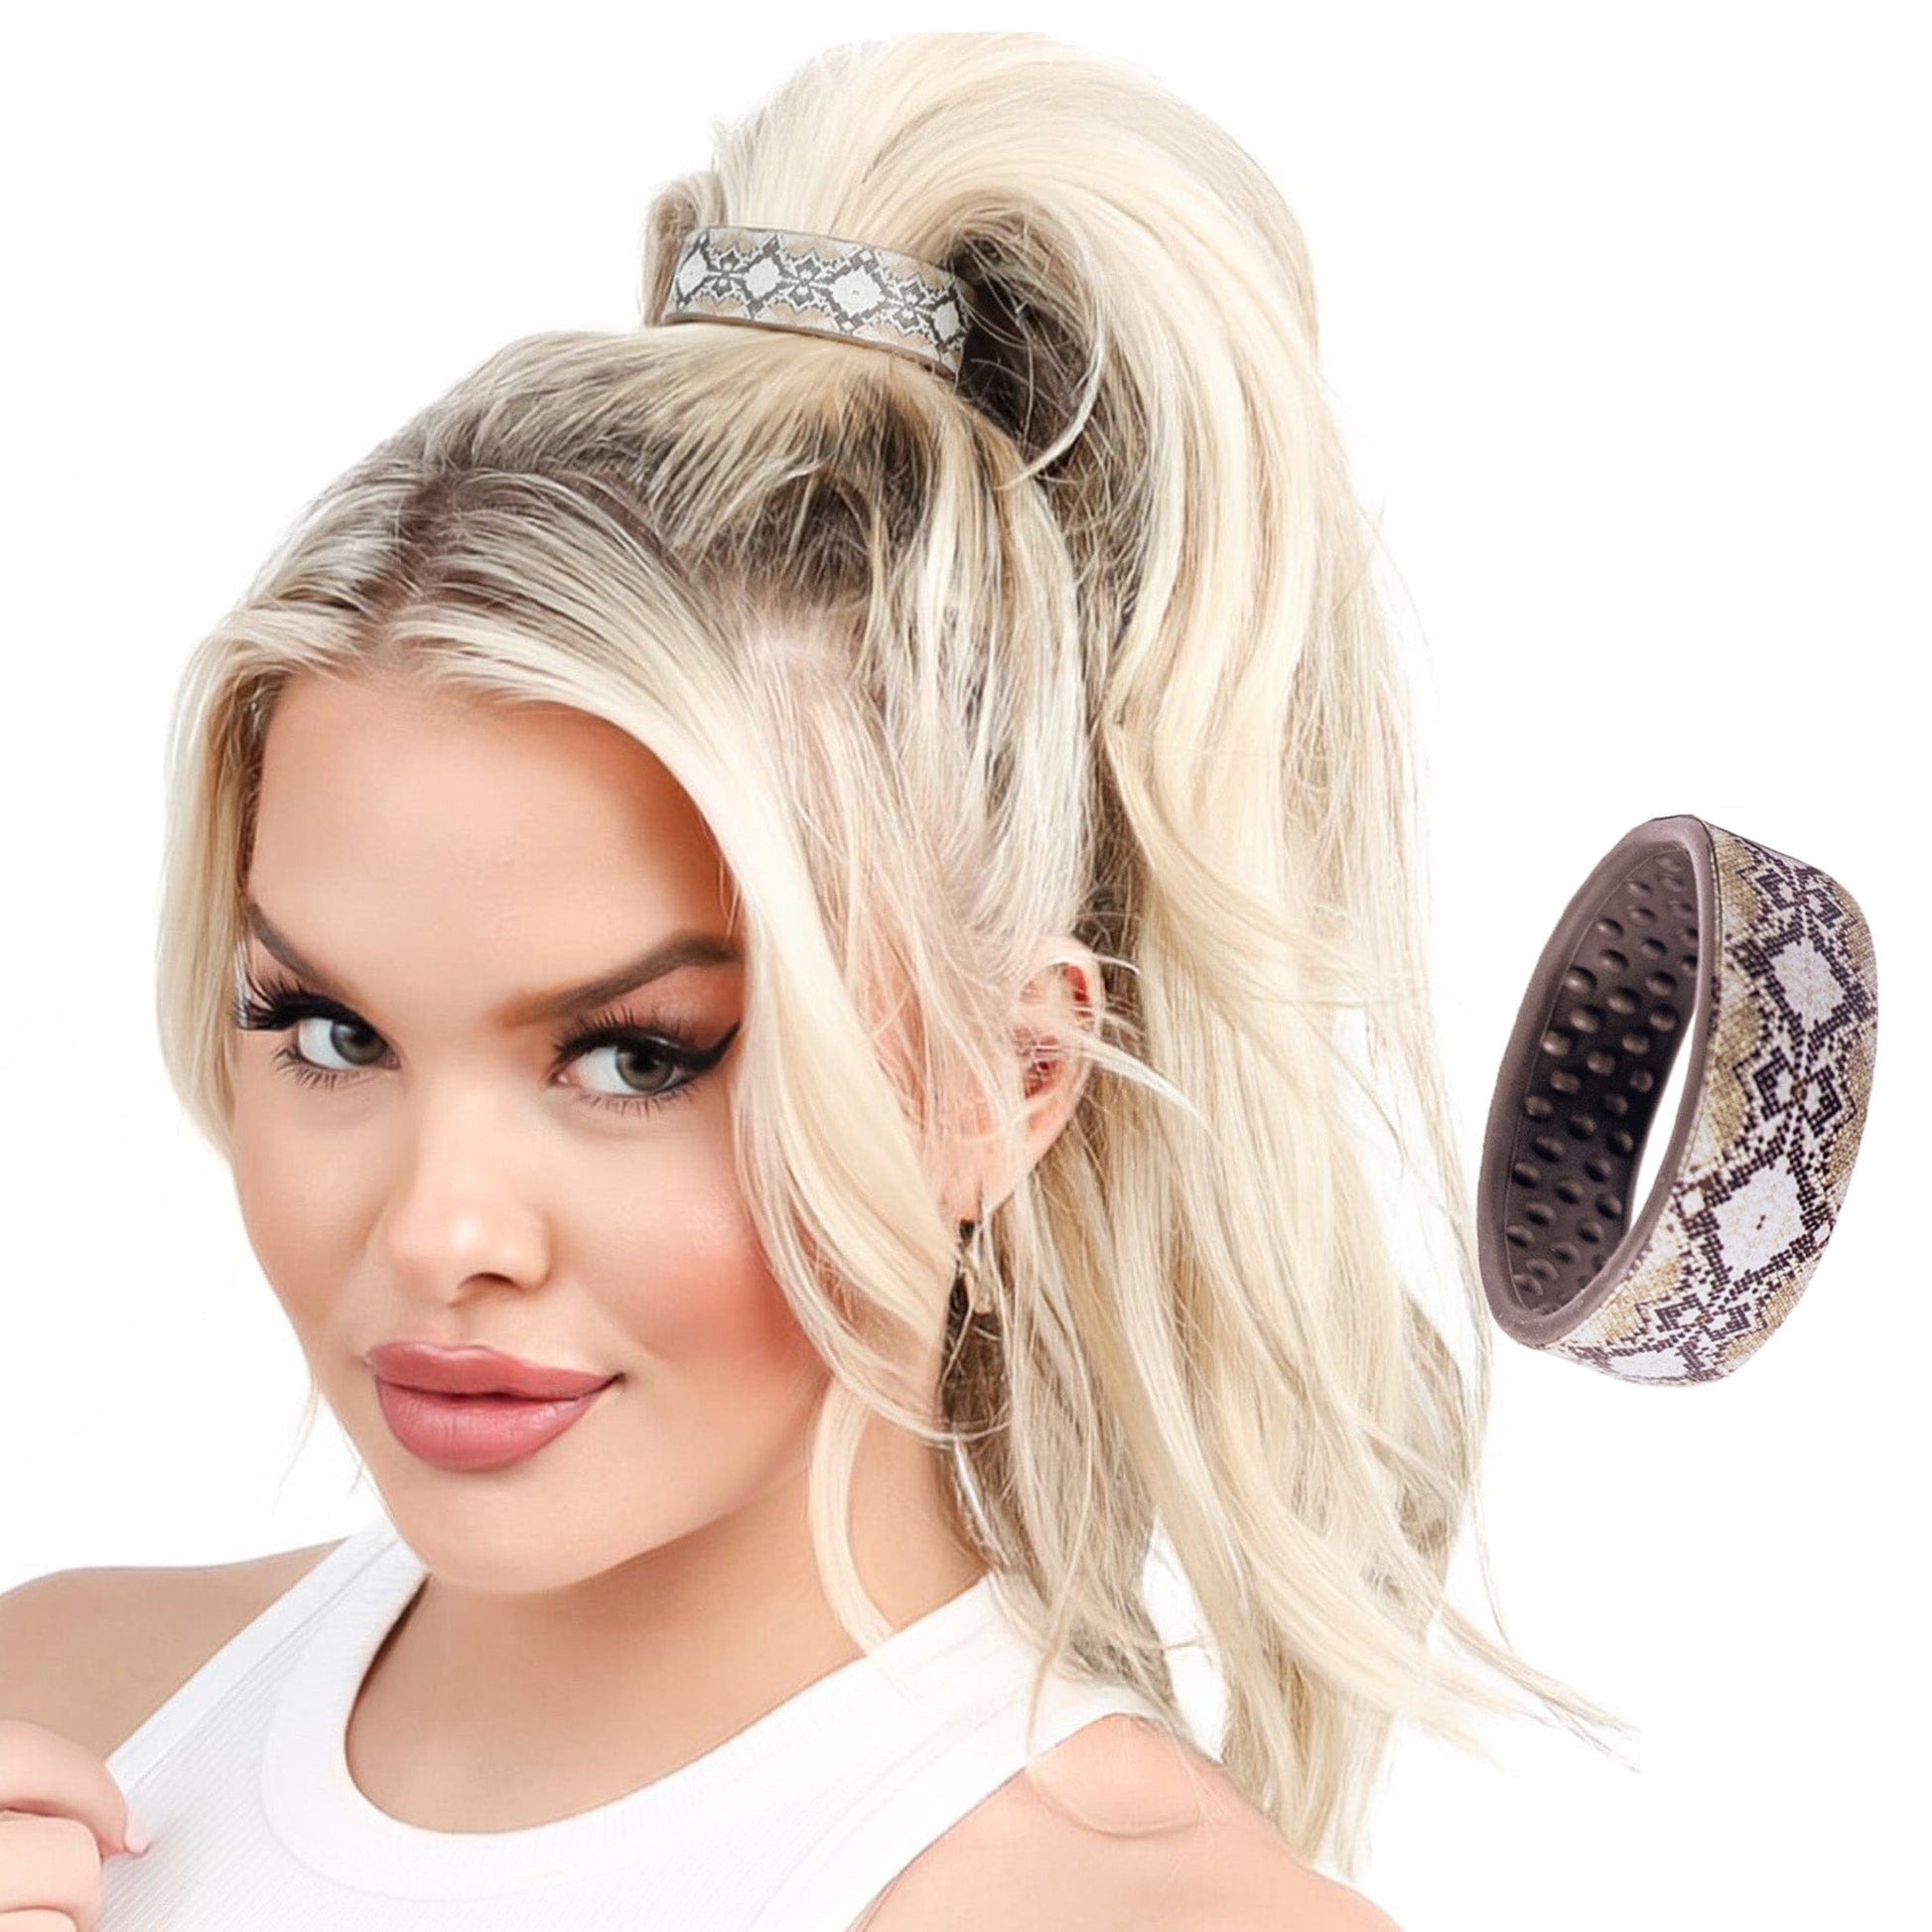 Snakeskin Limited Edition Designer PONY-O. This larger size is perfect for ponytails and all-up styles